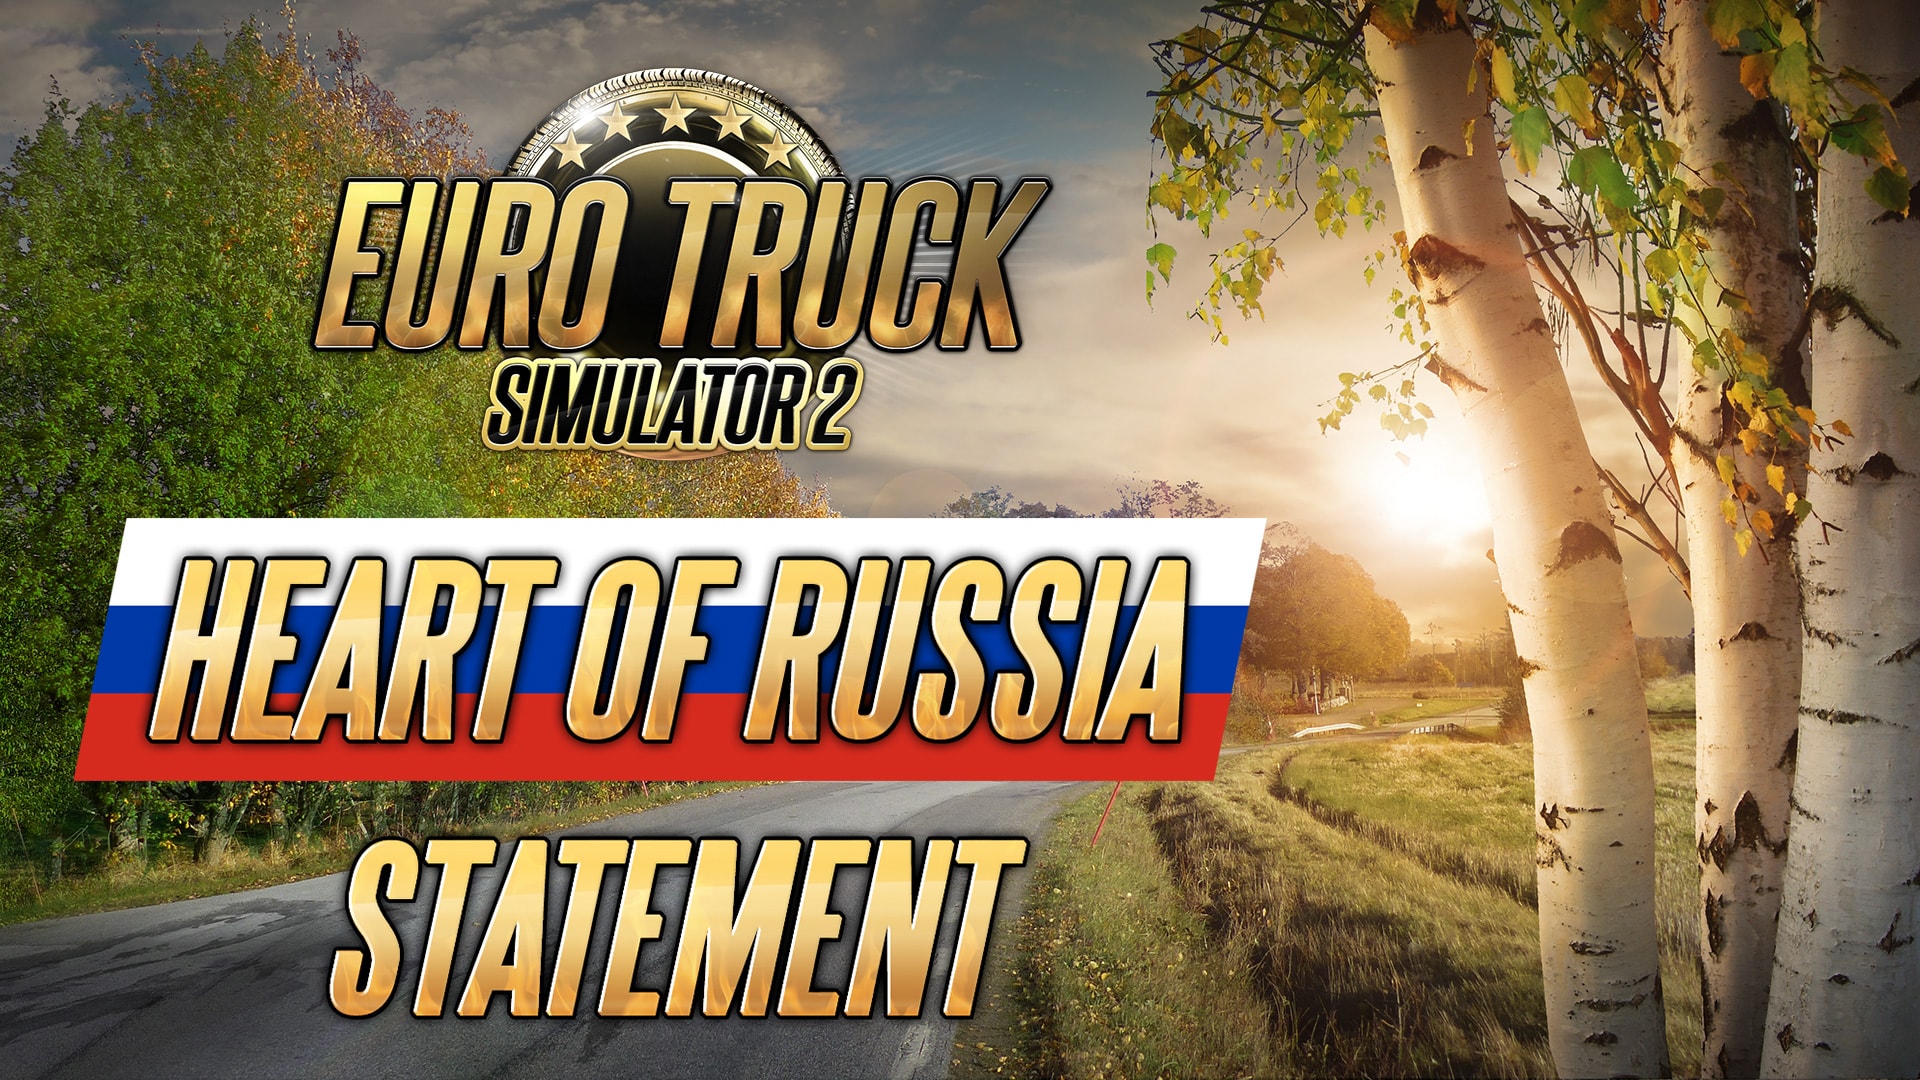 https://s1.cdn.autoevolution.com/images/news/euro-truck-simulator-2-heart-of-russia-dlc-gets-canceled-for-obvious-reasons-189999_1.jpg